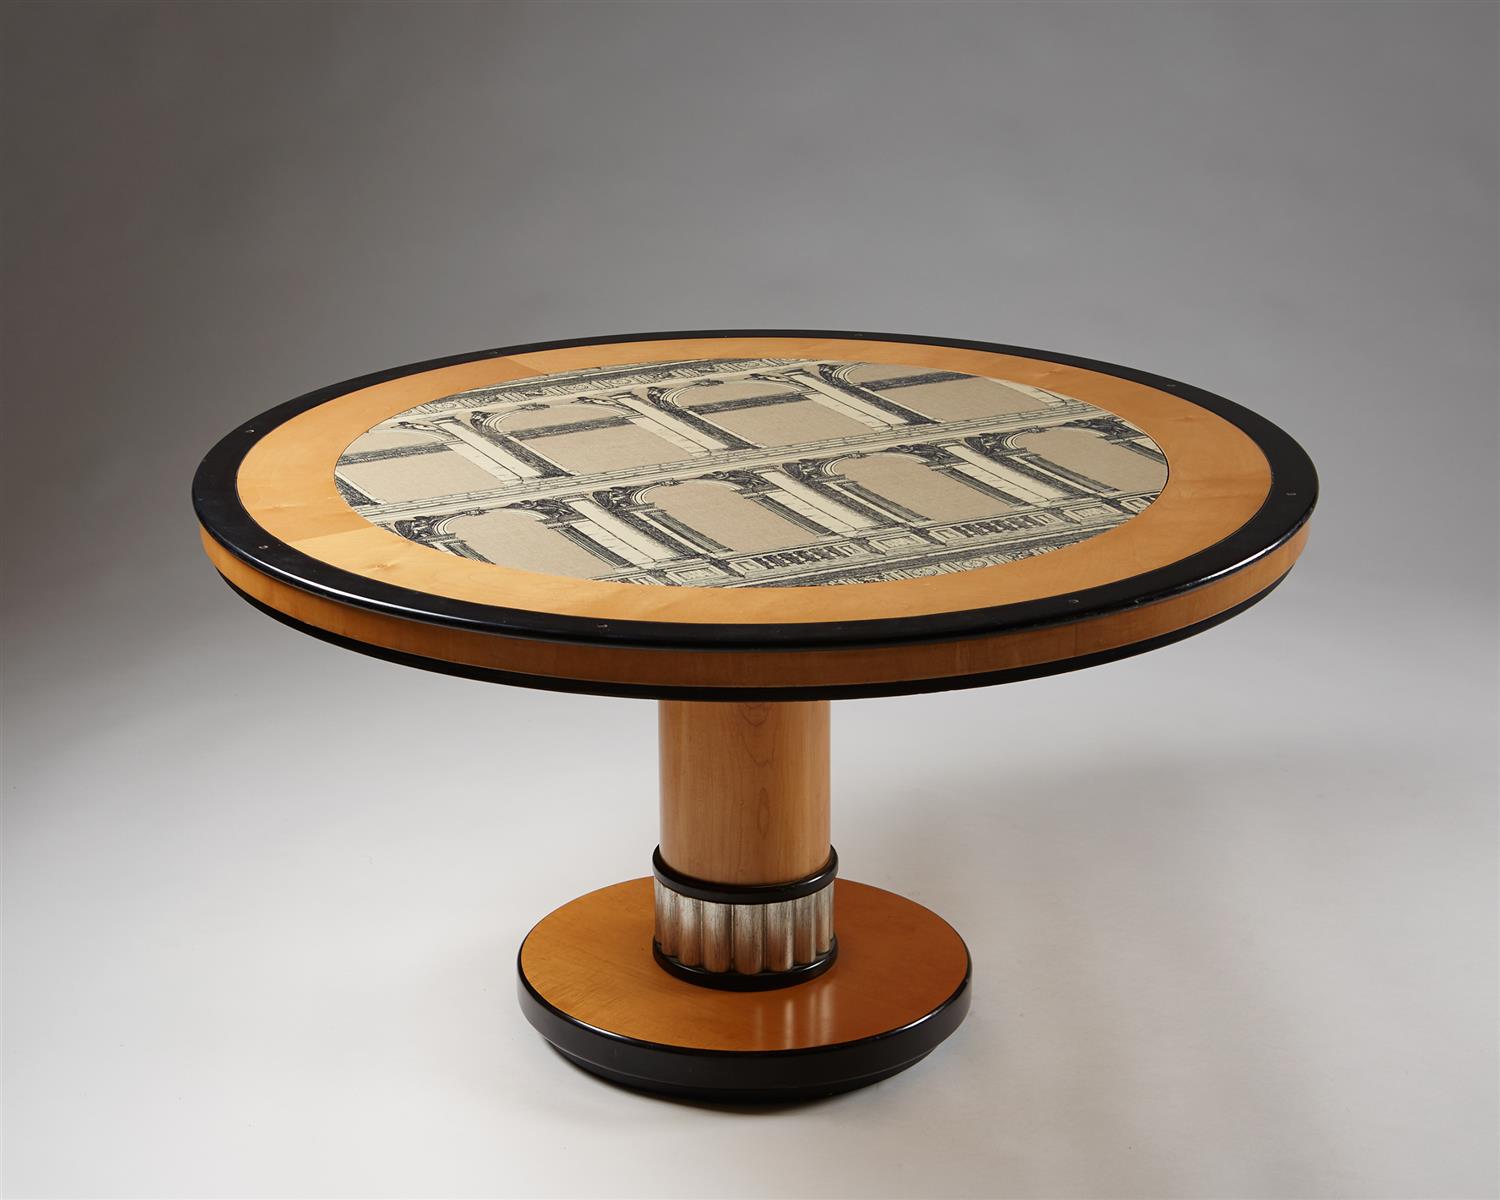 Occasional table, designed by Piero Fornasetti, — Modernity